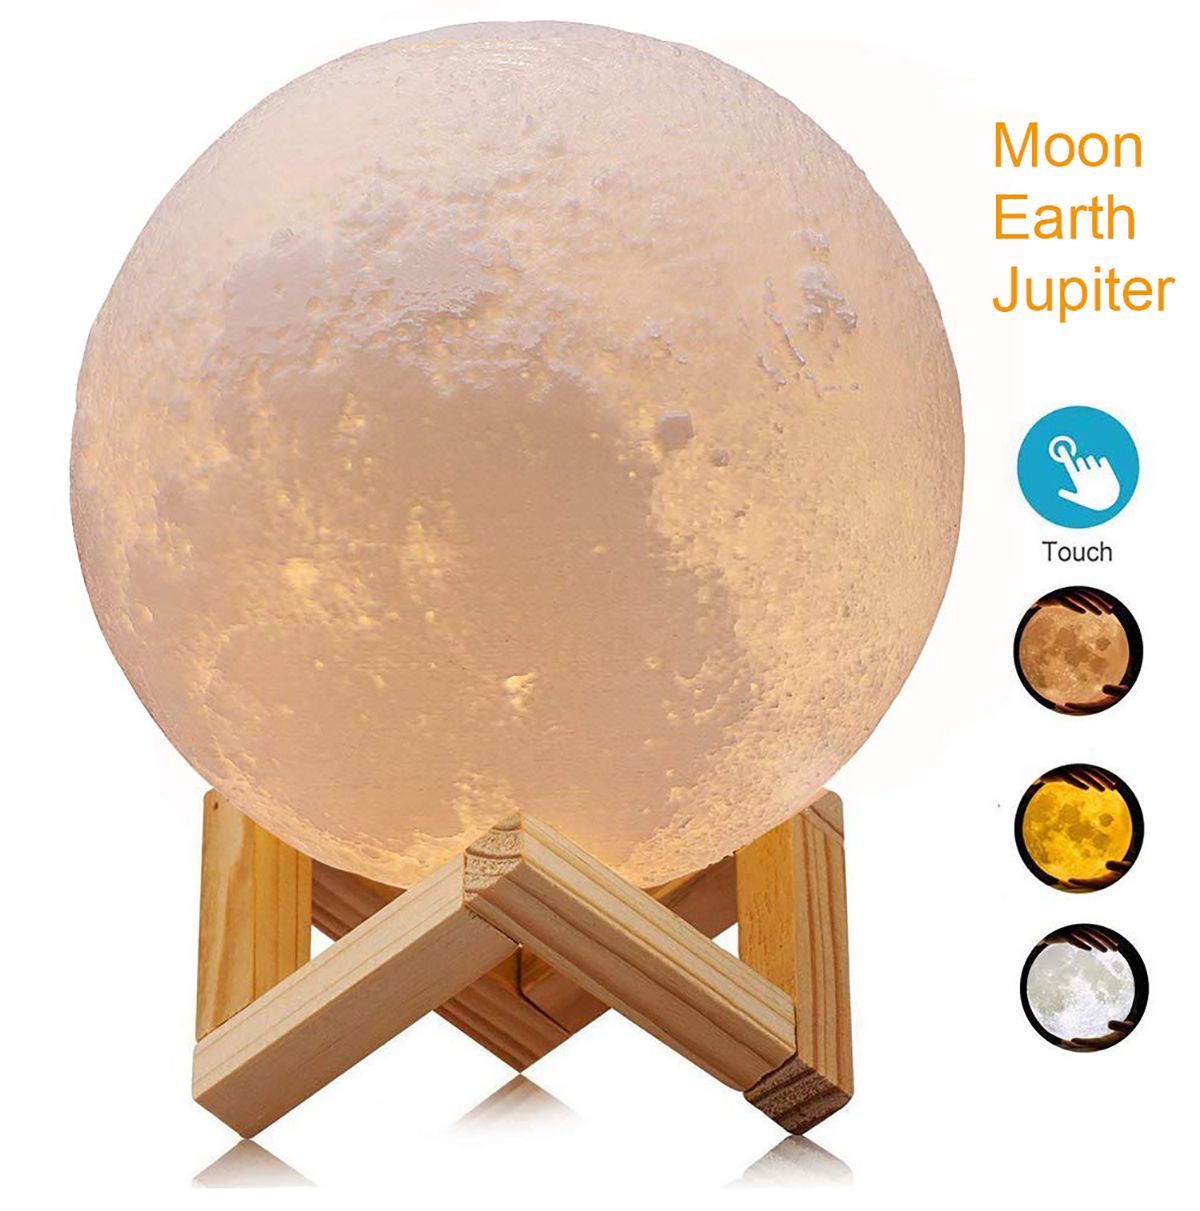 Moon-Lamp-Humidifier-Aromatherapy-Diffuser-LED-Desk-Moon-Lamp-with-Cool-Mist-Humidifier-Function-Adj-1597367